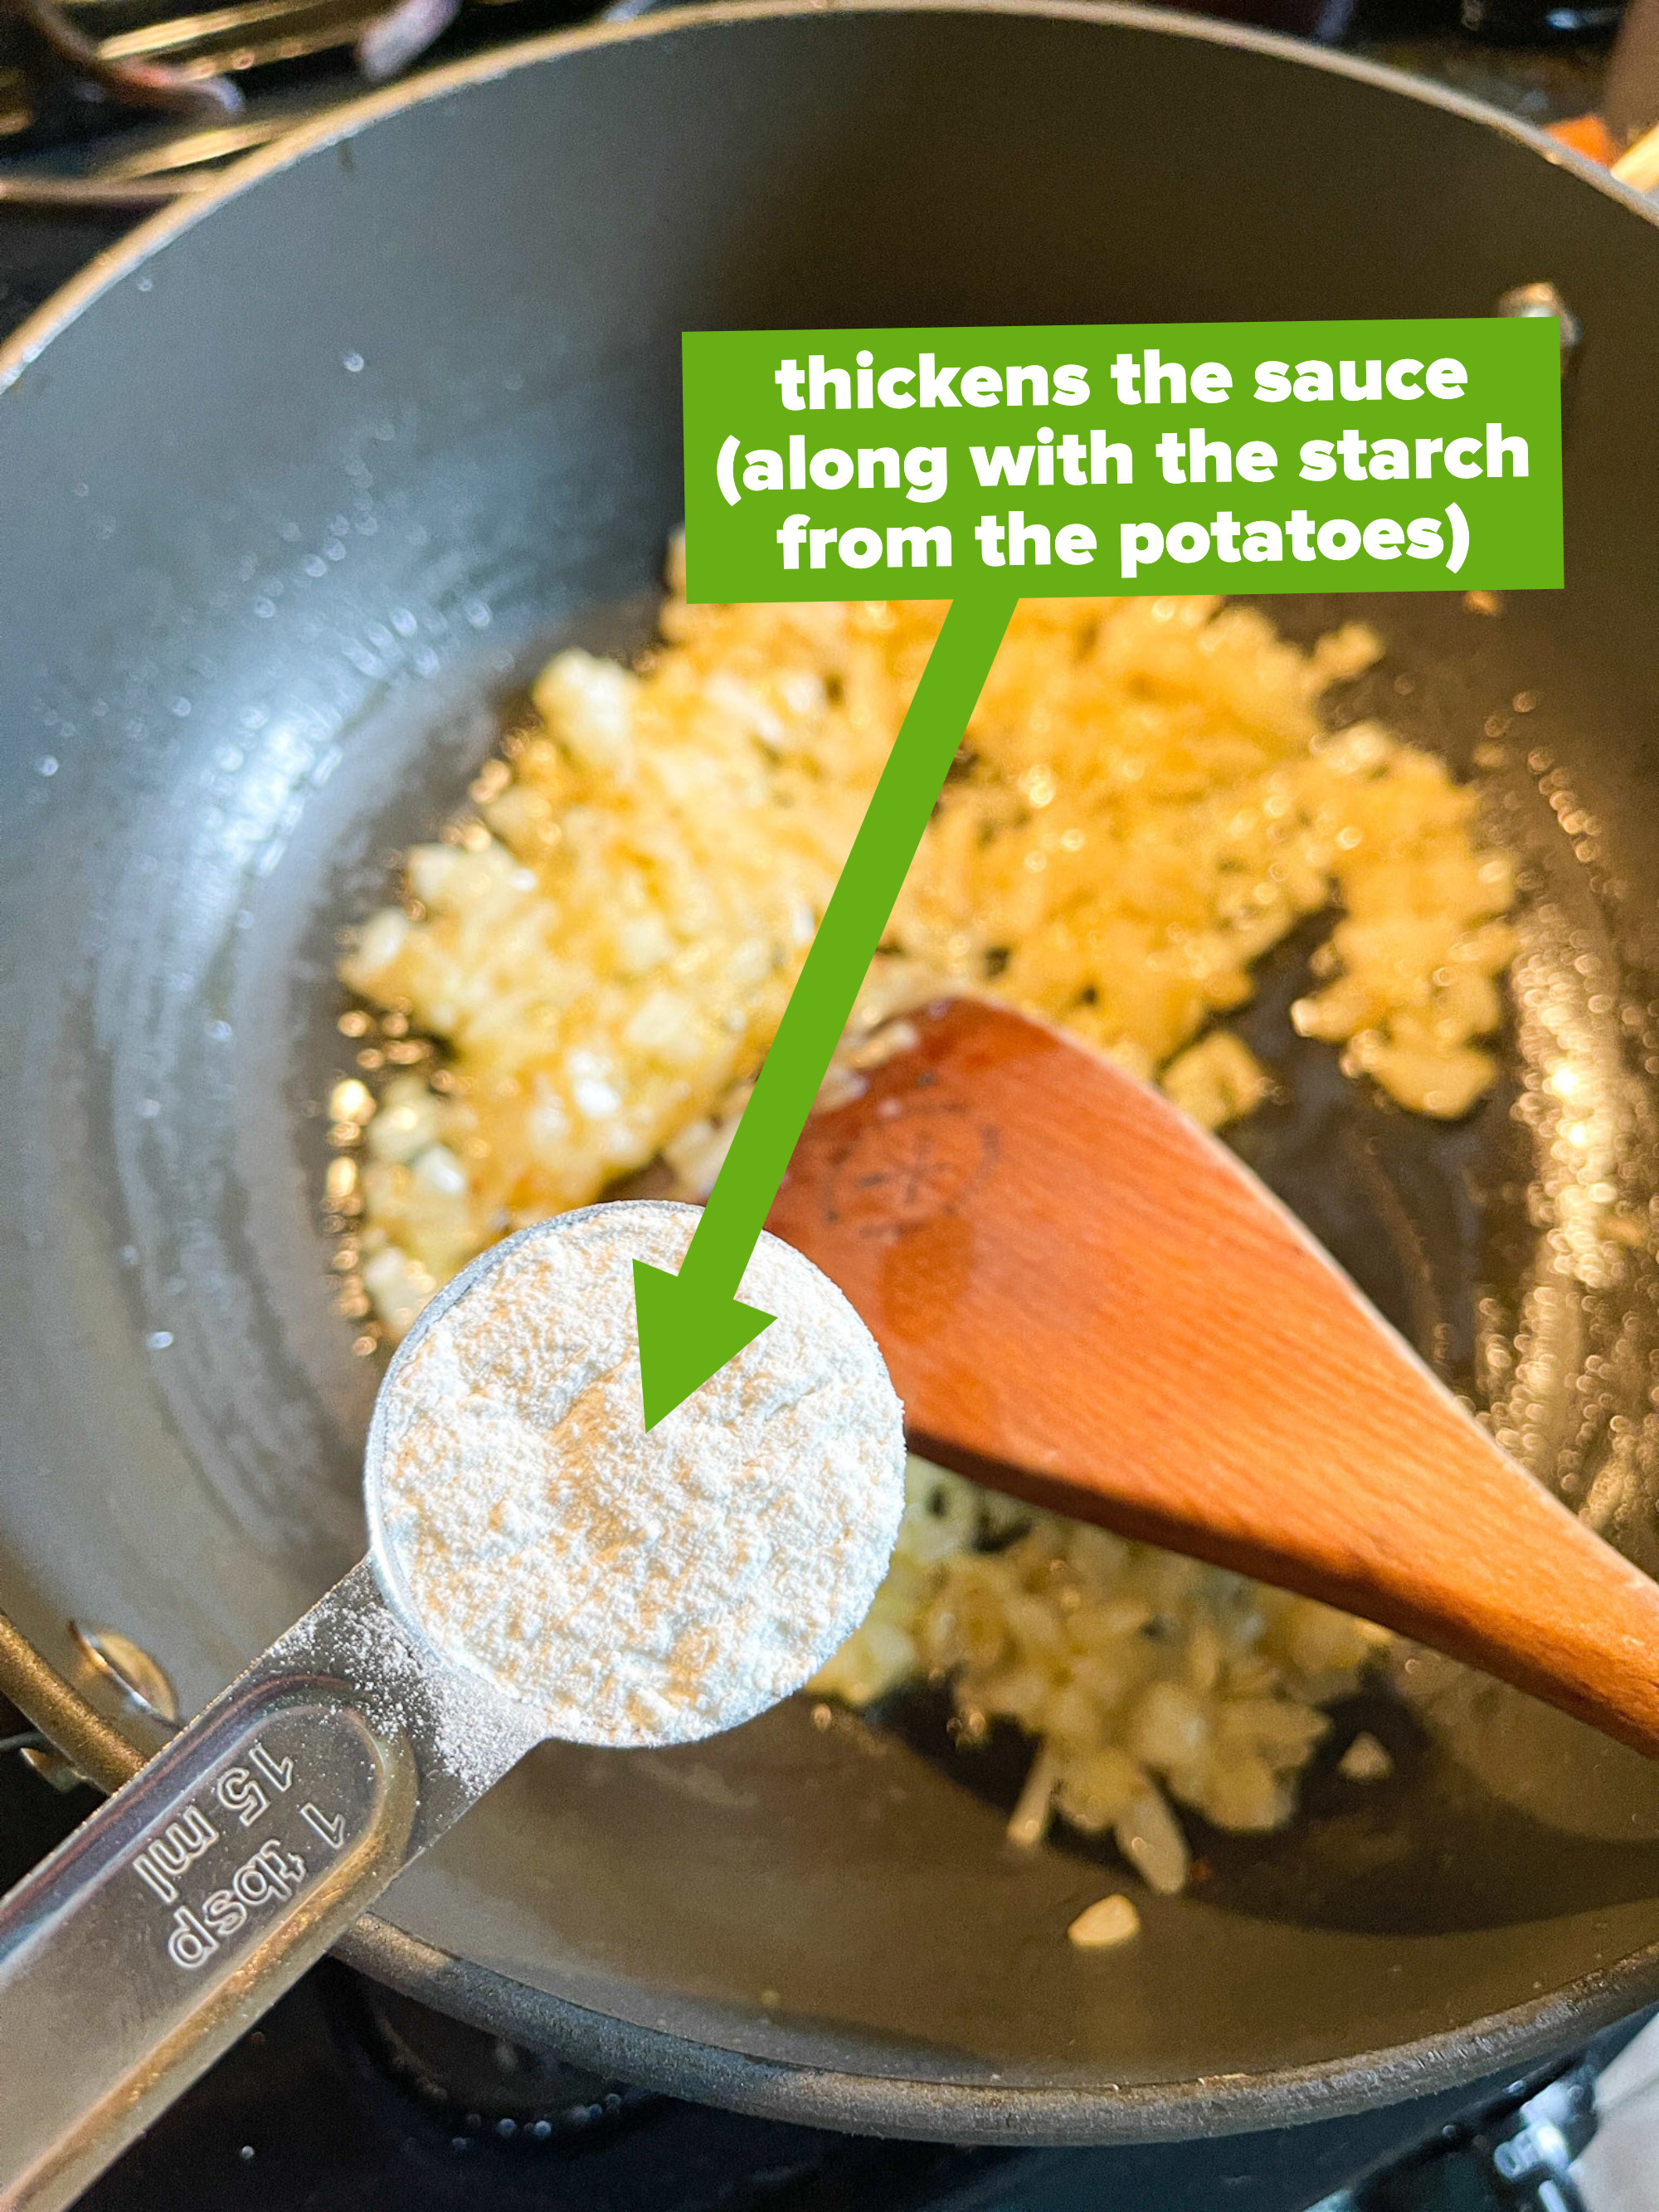 A scoop of flour being added to the recipe, with a note saying it works in tandem with the starch of the potatoes to thicken the sauce